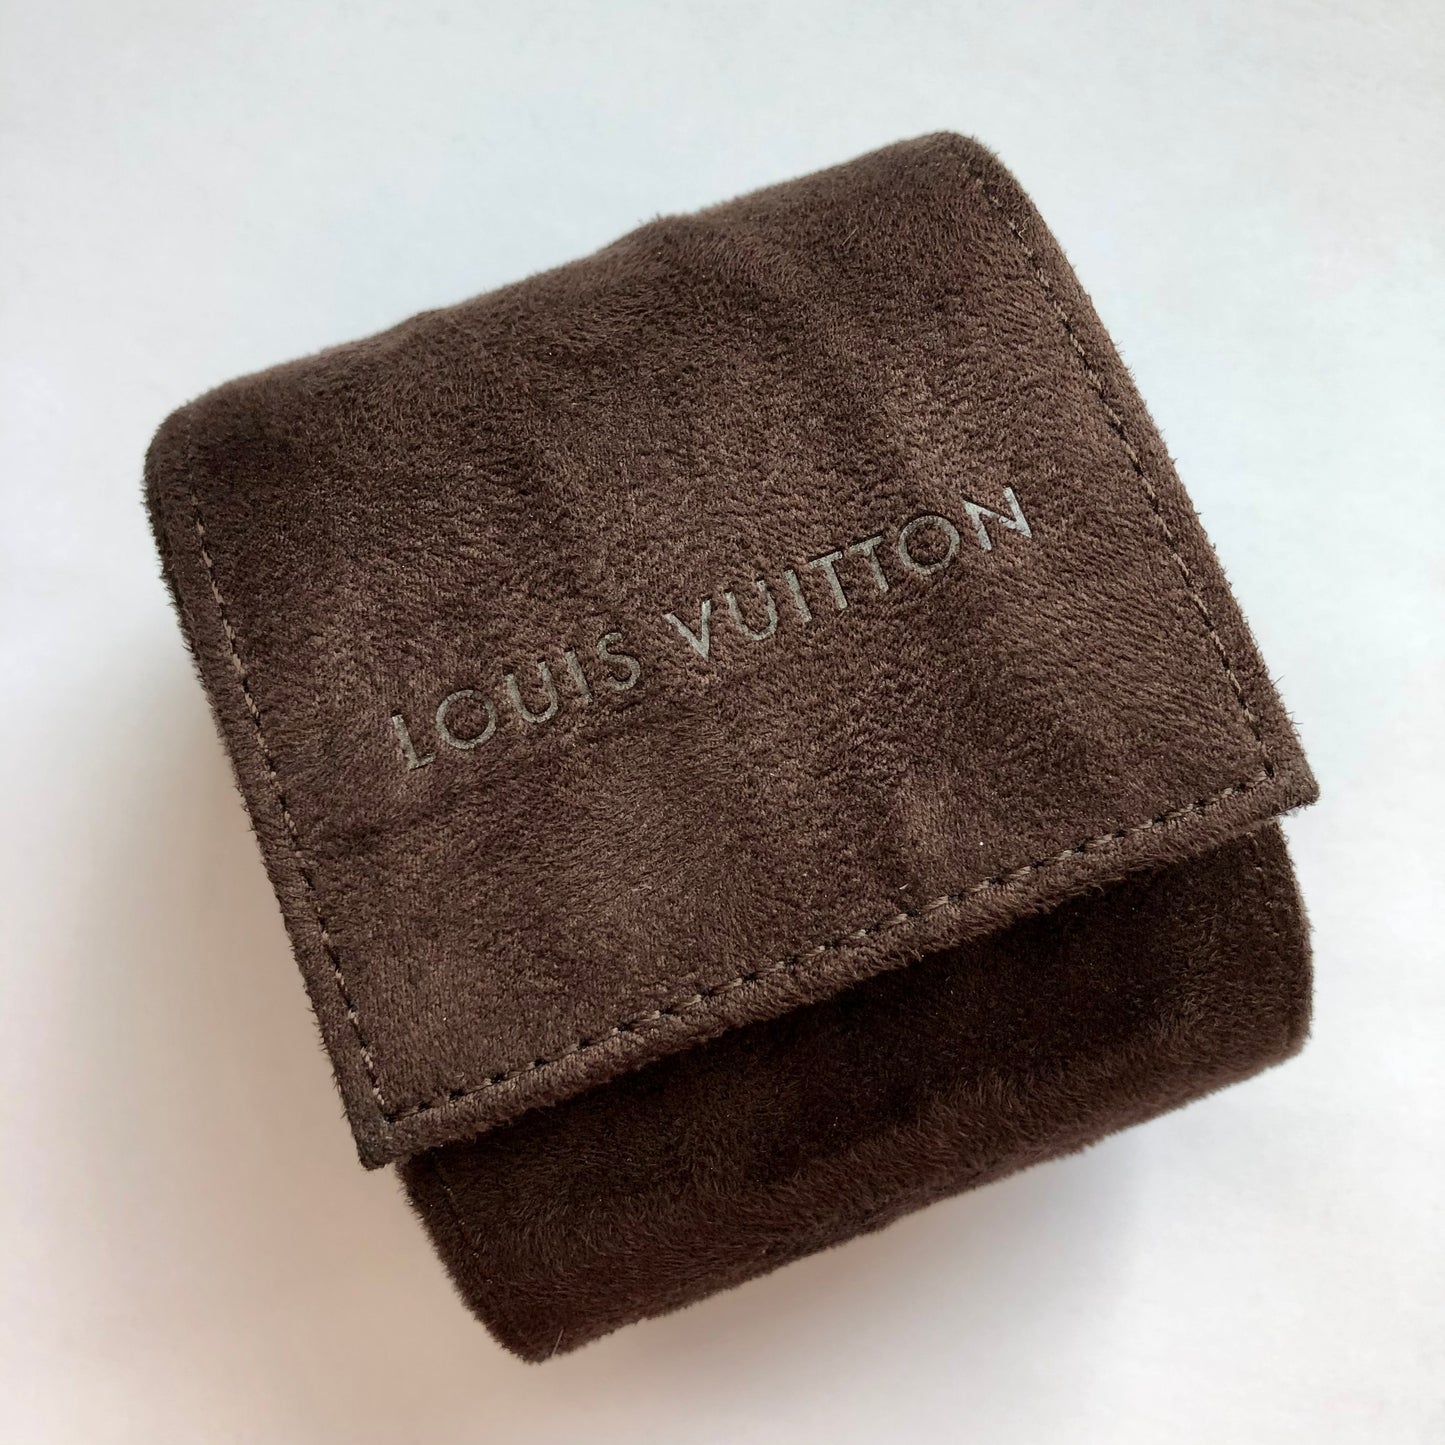 LOUIS VUITTON Brown Faux Suede Case with Pillow 3 x 3.5 x 2.5 inches